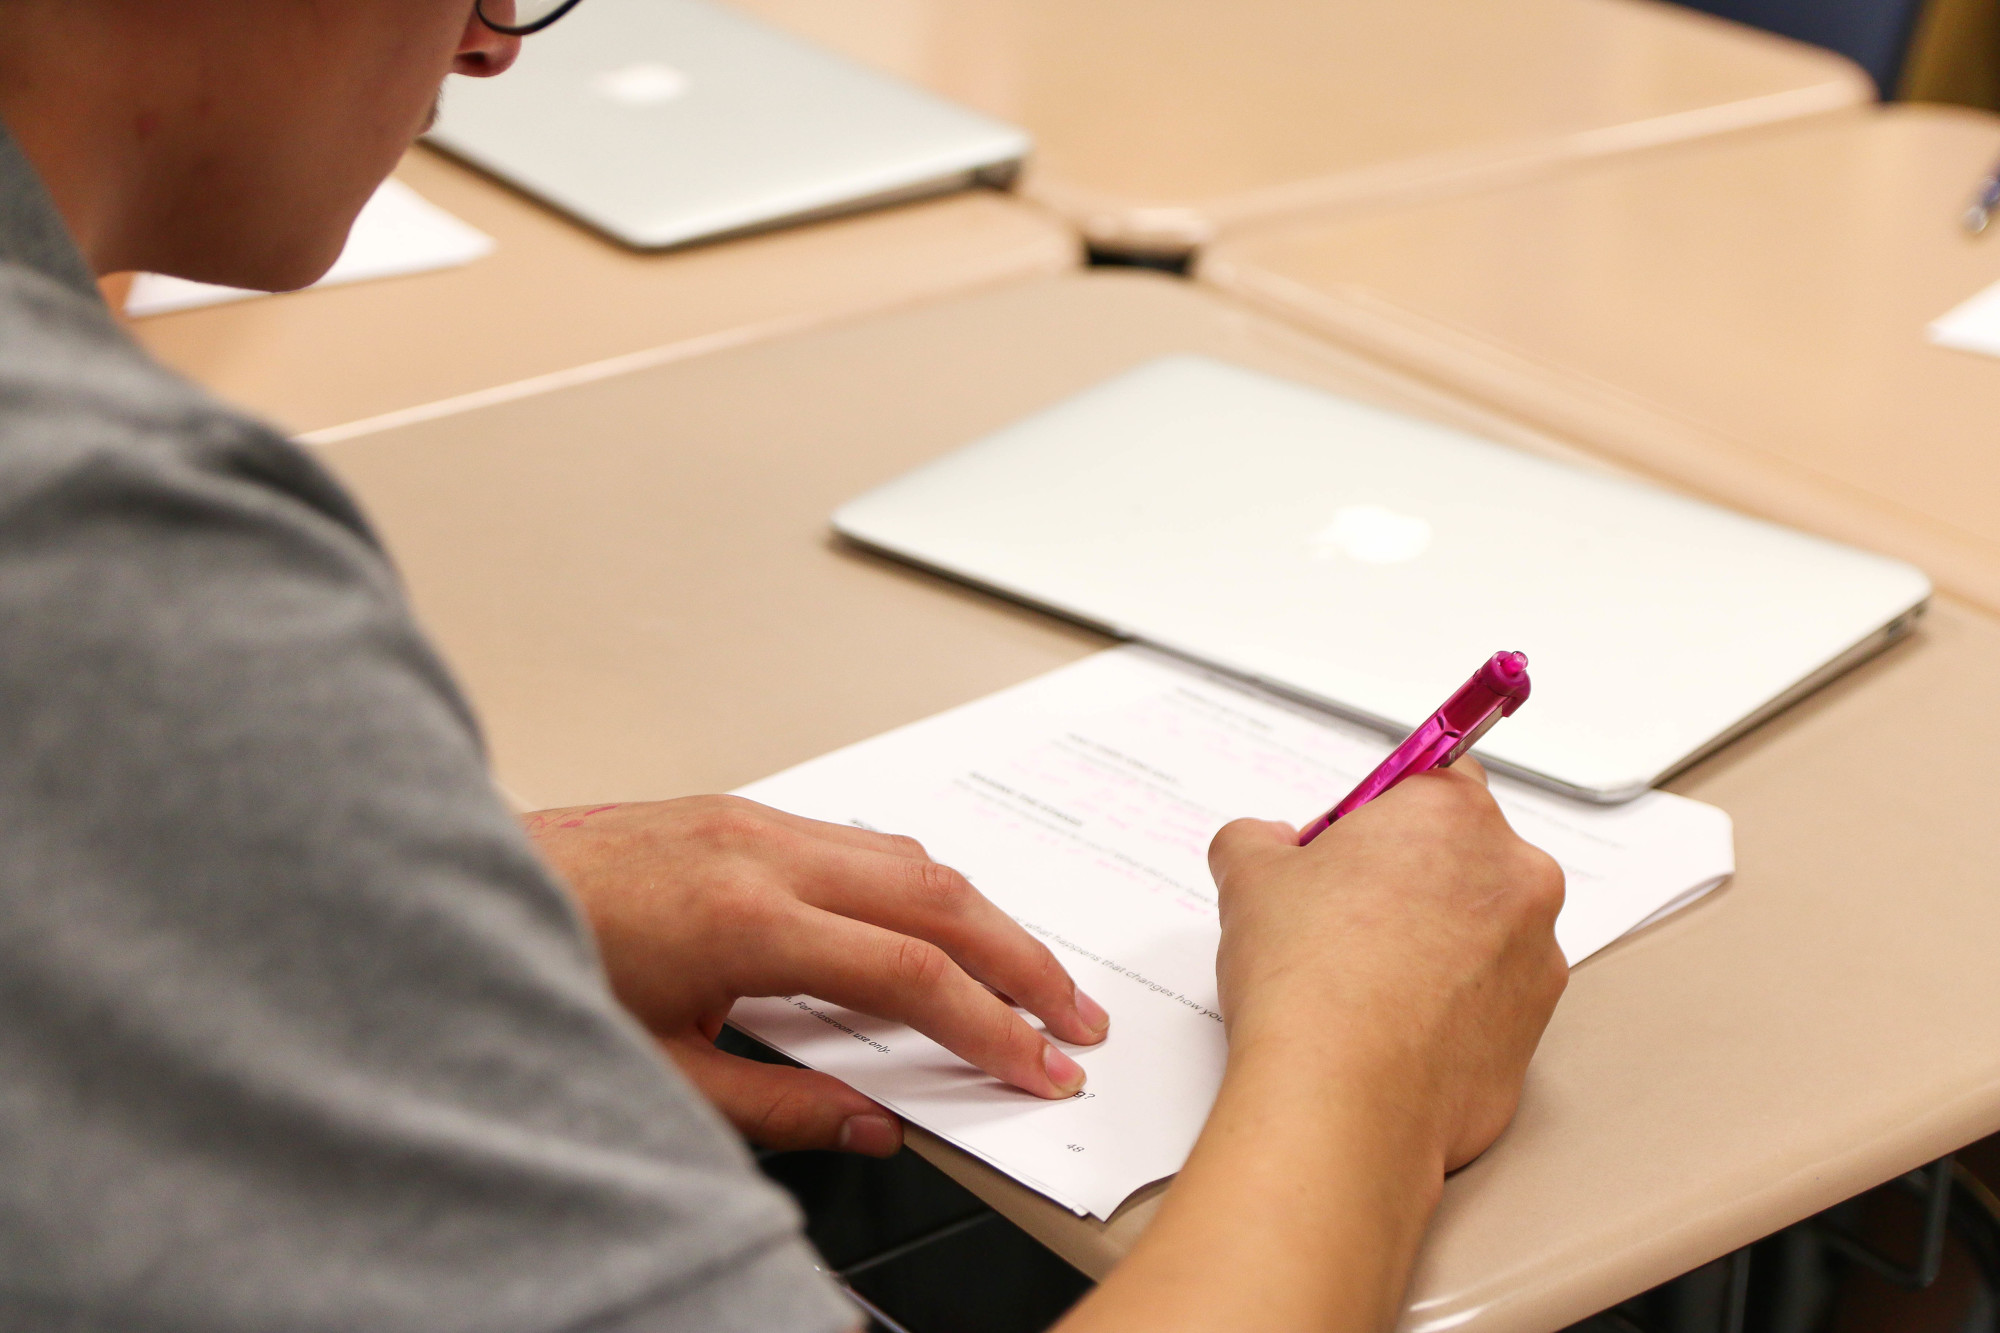 Matanzas student Lucas Cooper writes down ideas in response to writing prompts. Photo by Paige Wilson